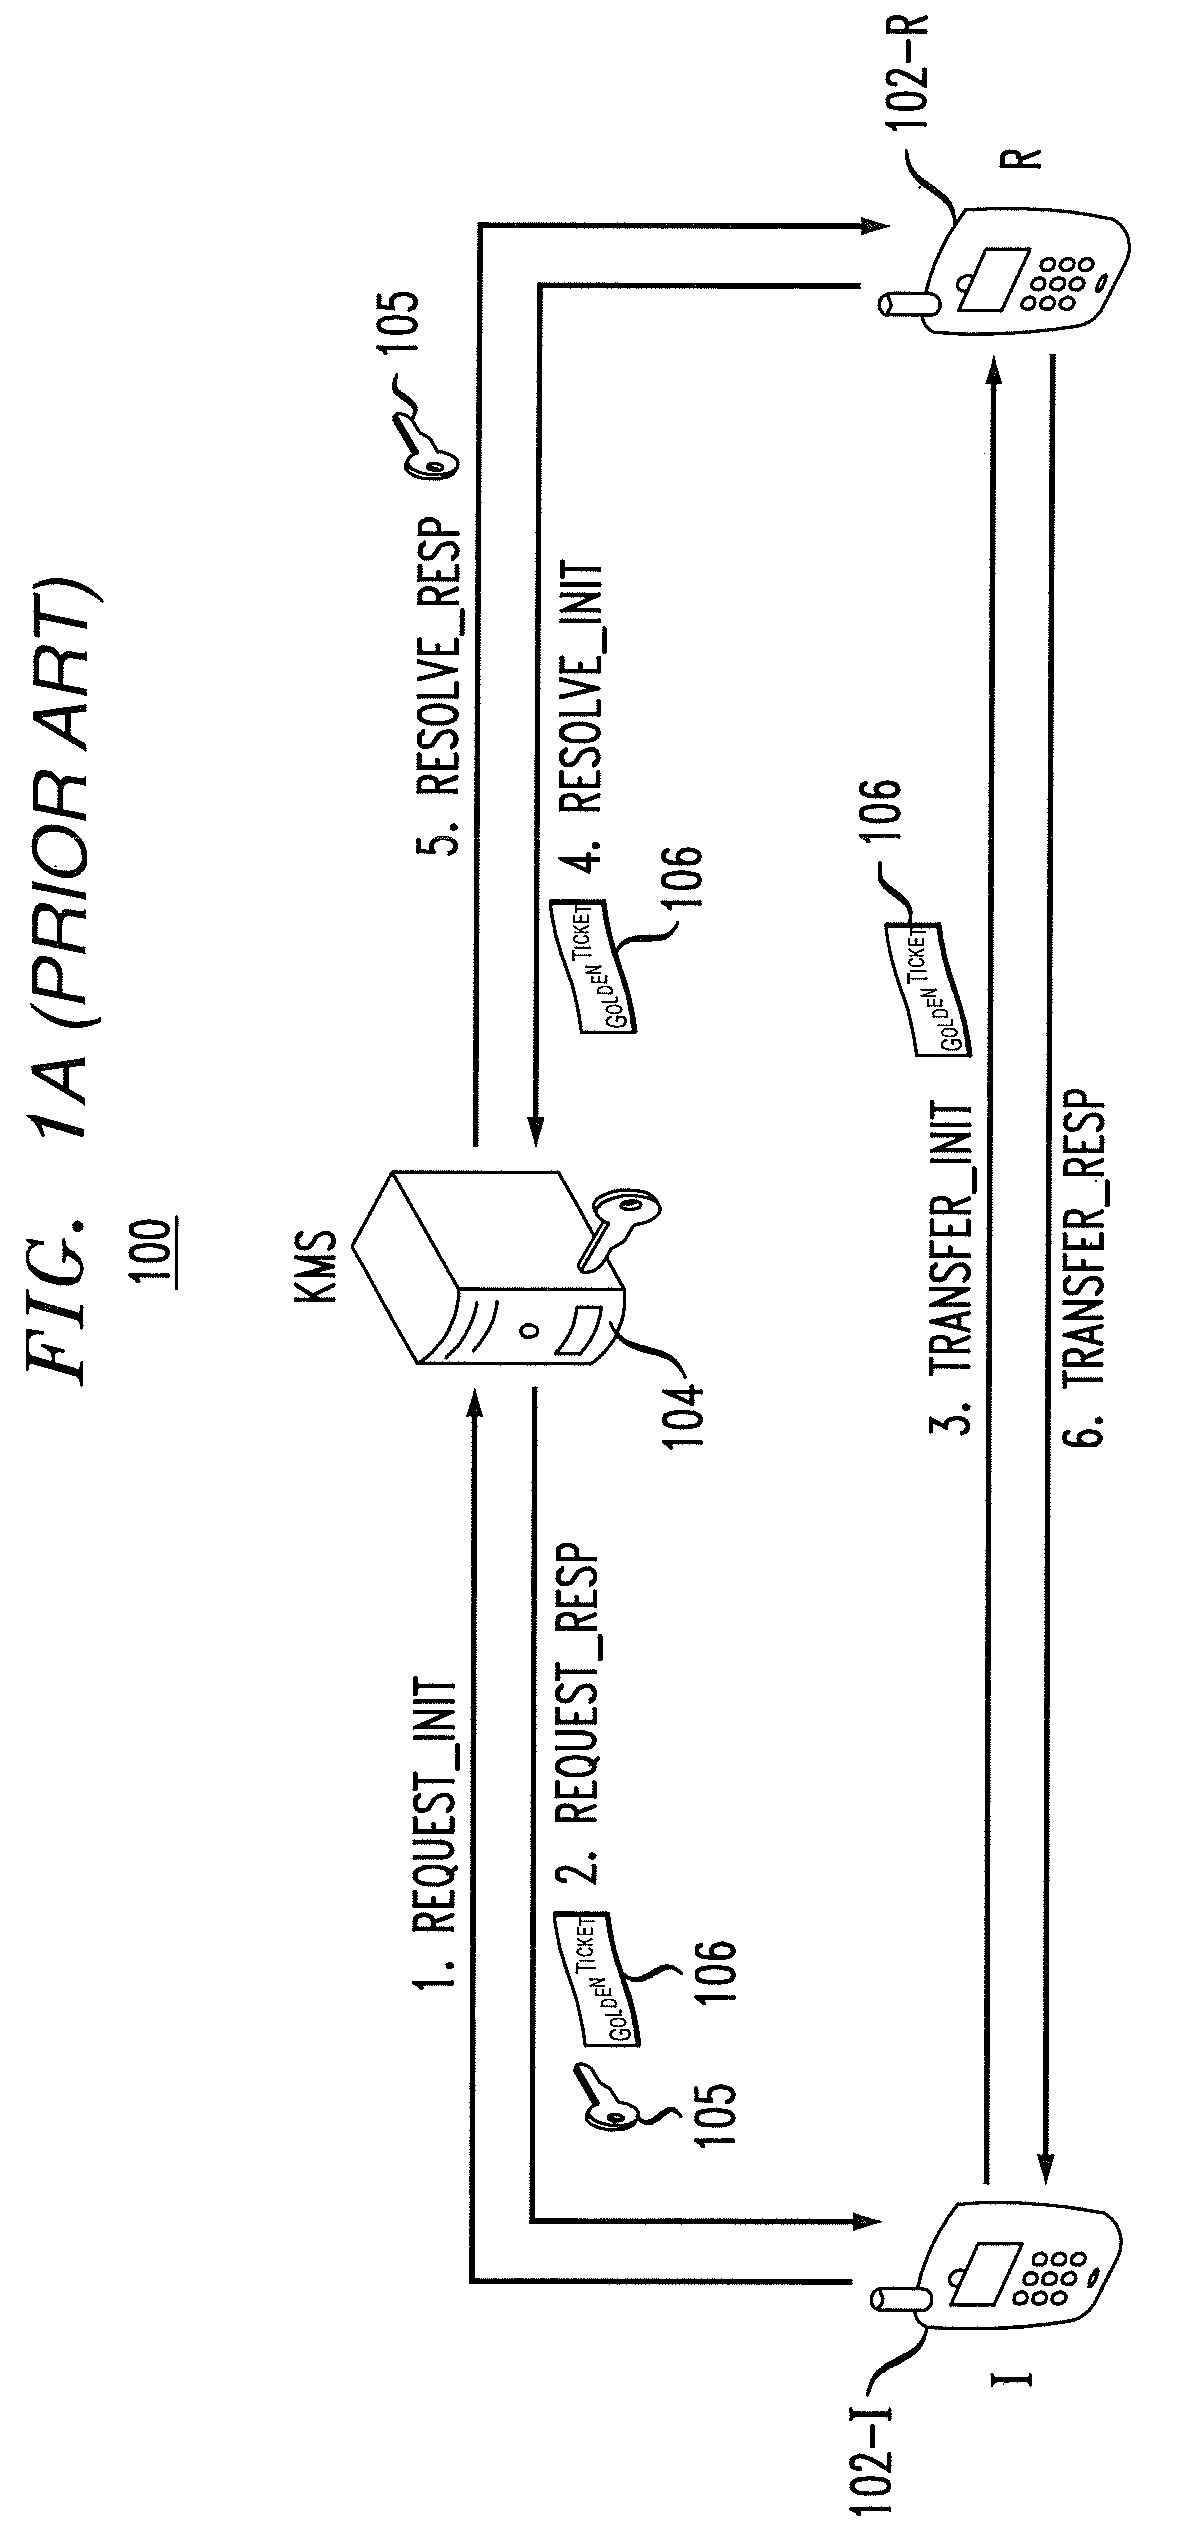 Hierarchical key management for secure communications in multimedia communication system